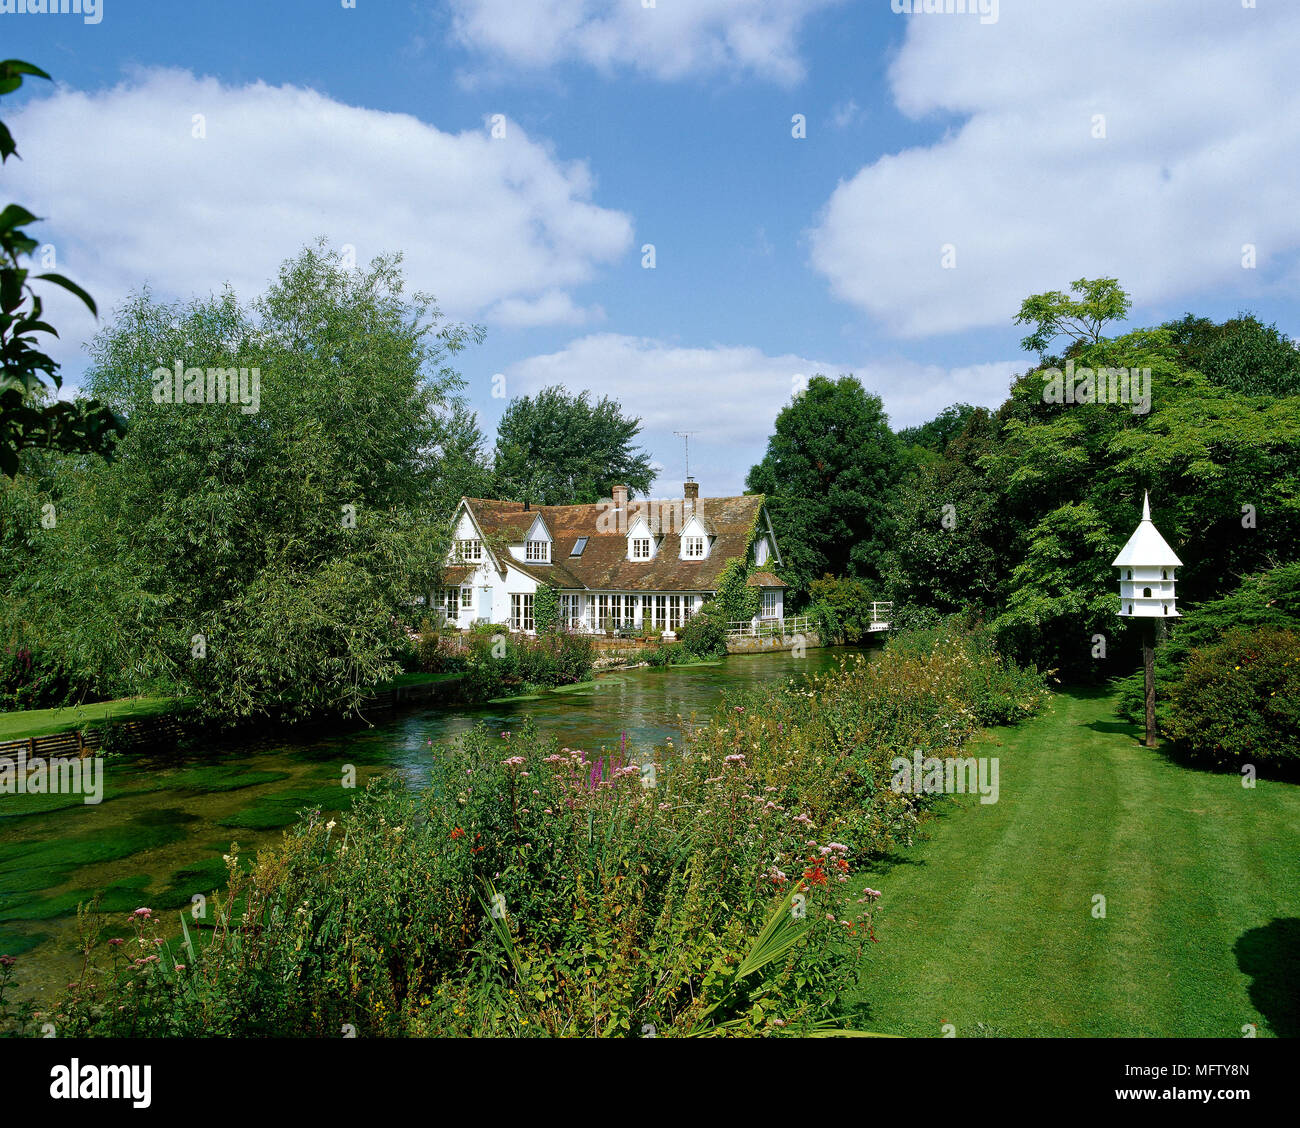 An exterior of a detached riverside country house, garden with lake and flower border, lawn Stock Photo